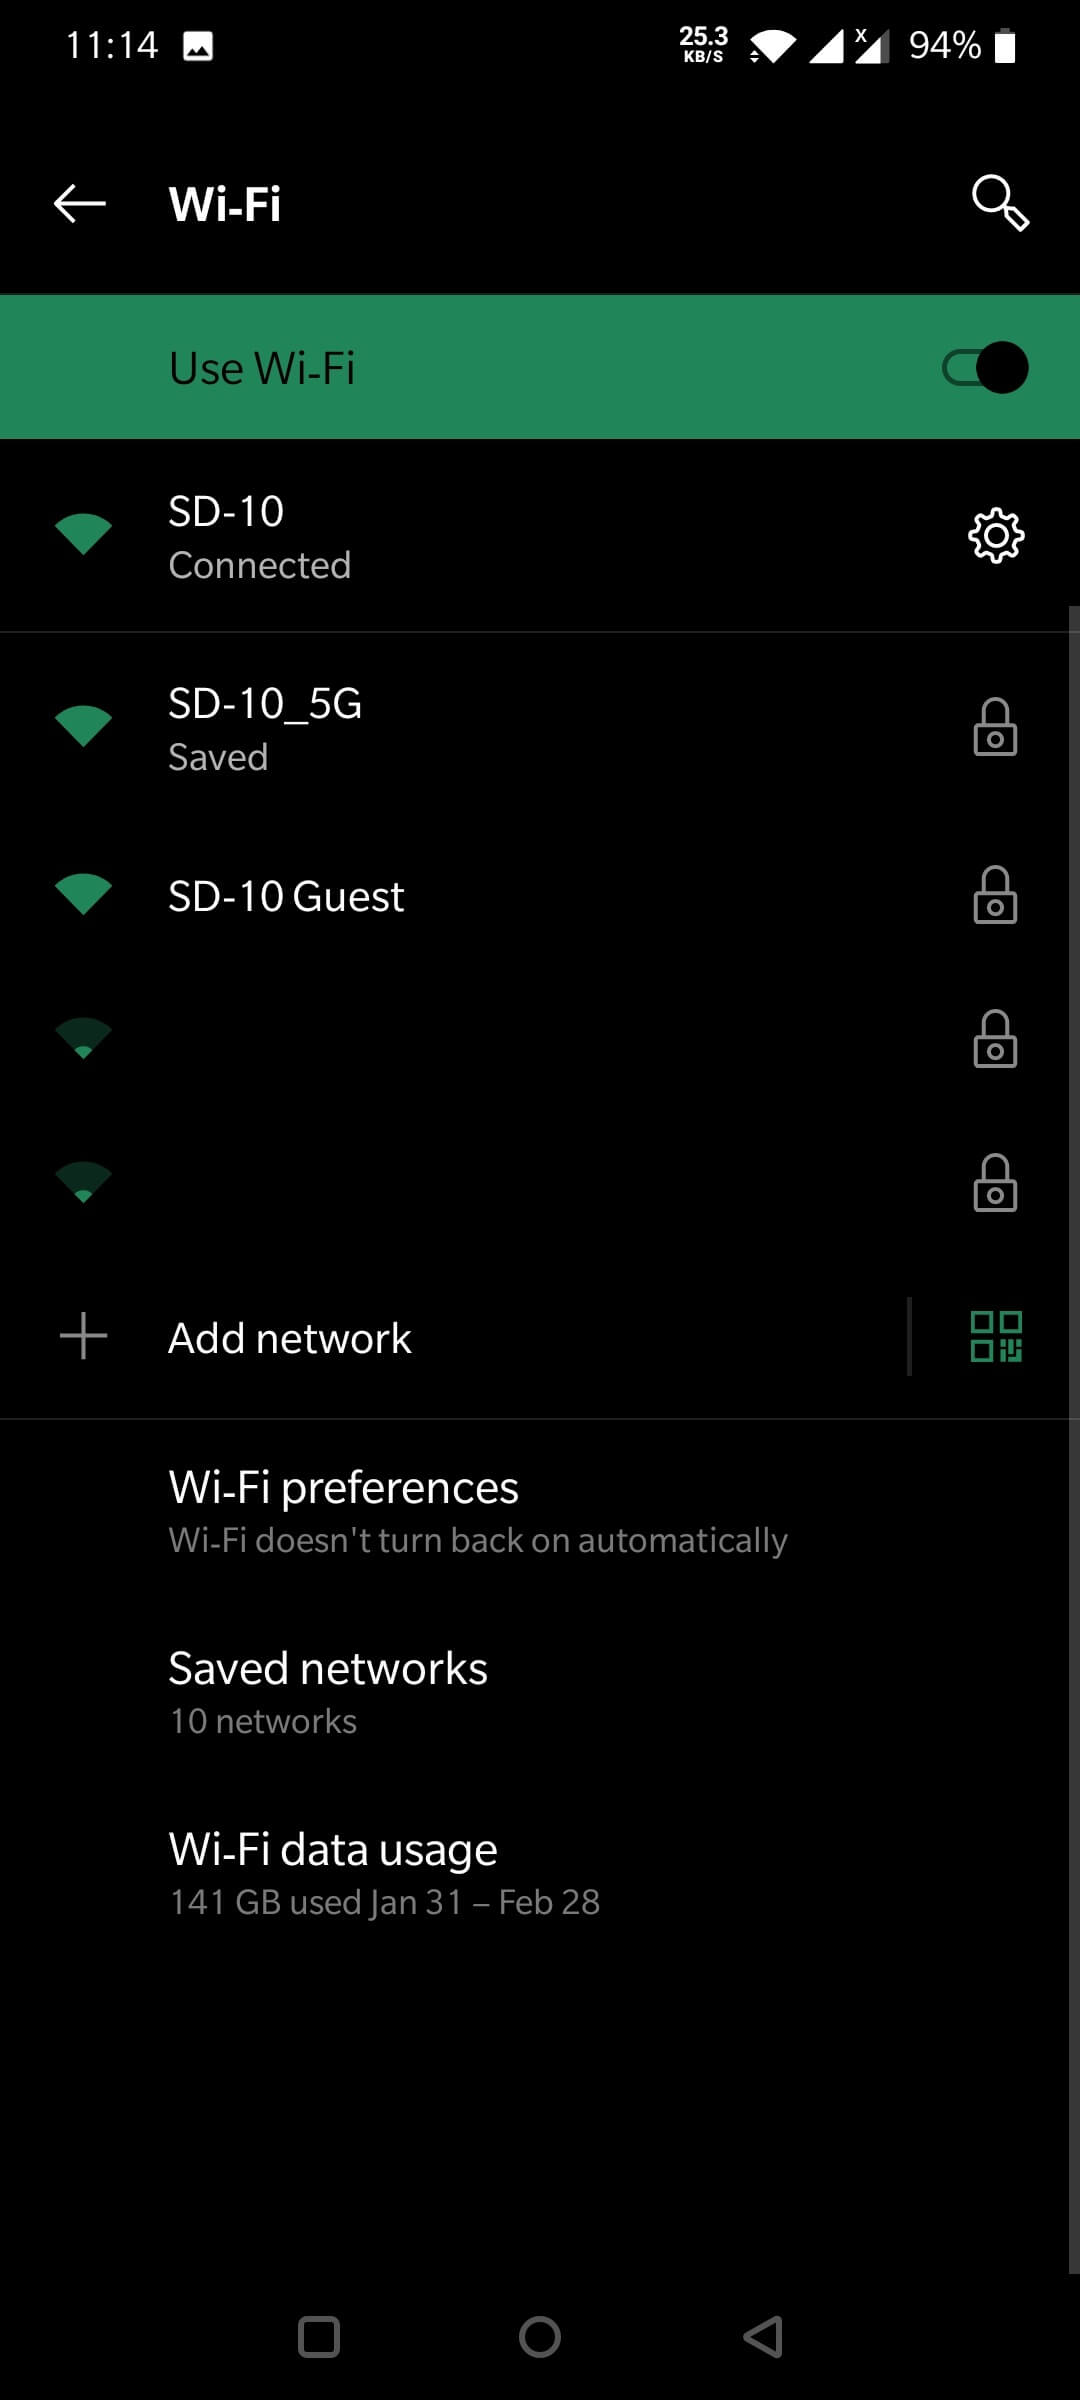 Go to the Settings menu on your Android device.
Select "Wi-Fi" or "Network & Internet" depending on your device.